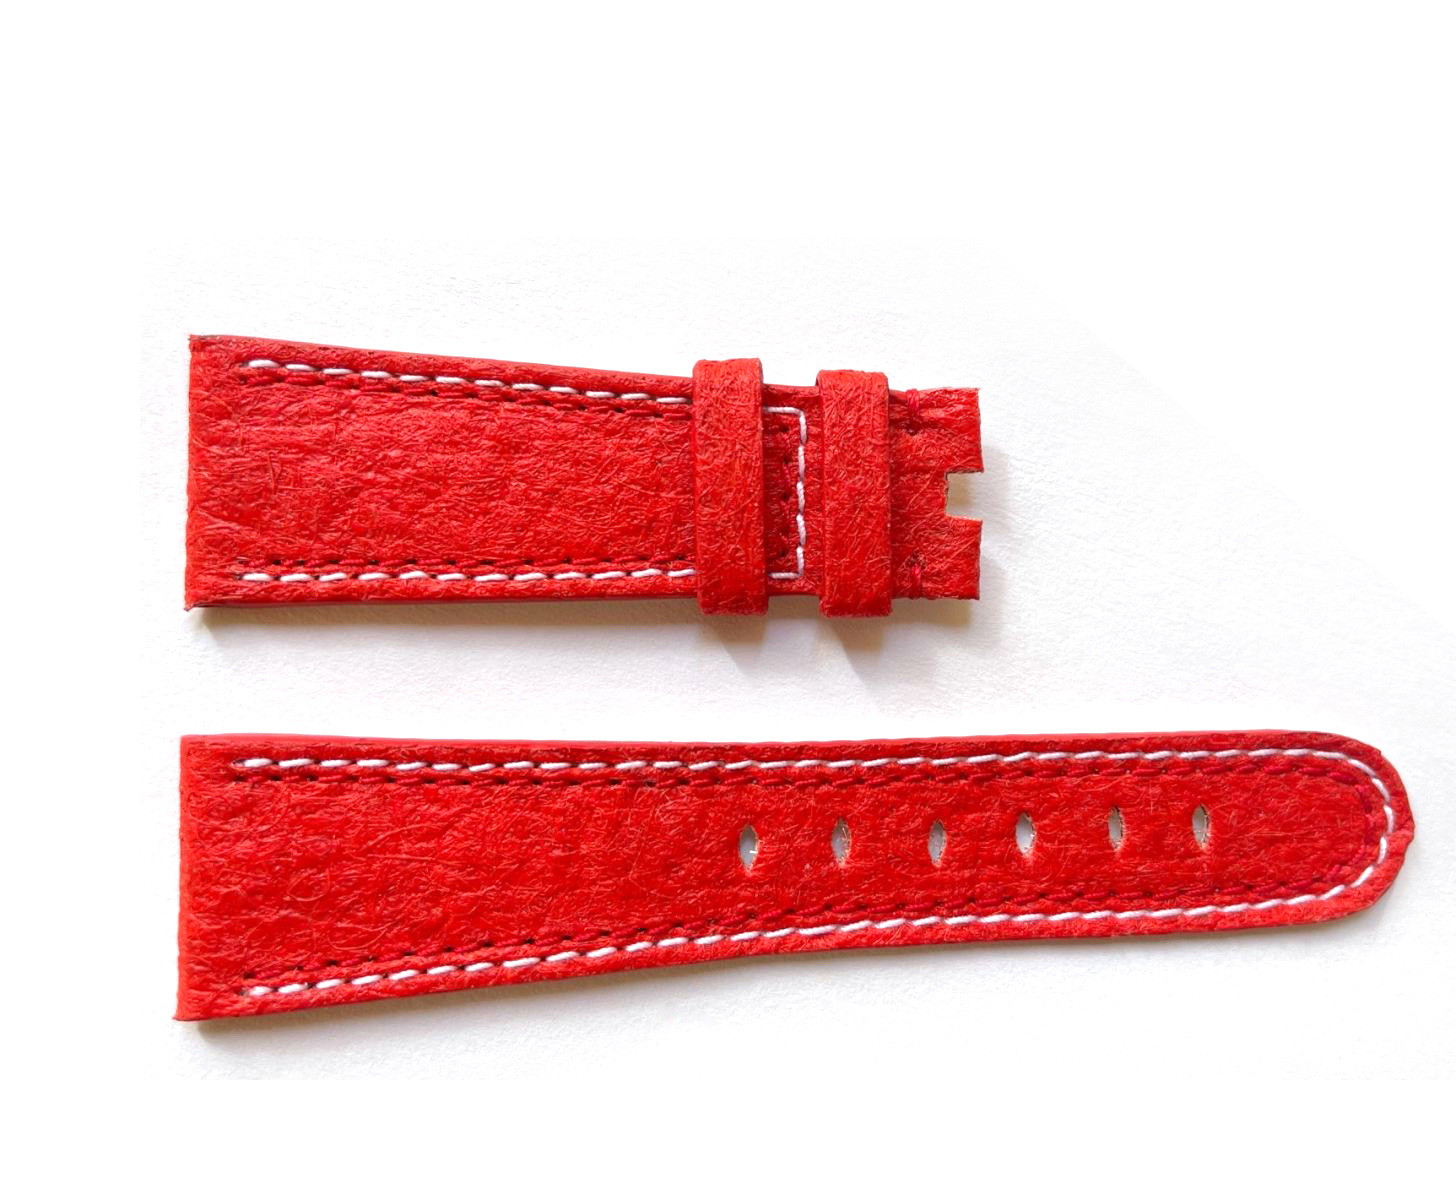 Red Paprika Pinatex Strap 16mm, 18mm, 19mm, 20mm, 21mm, 22mm General style. Double stitching